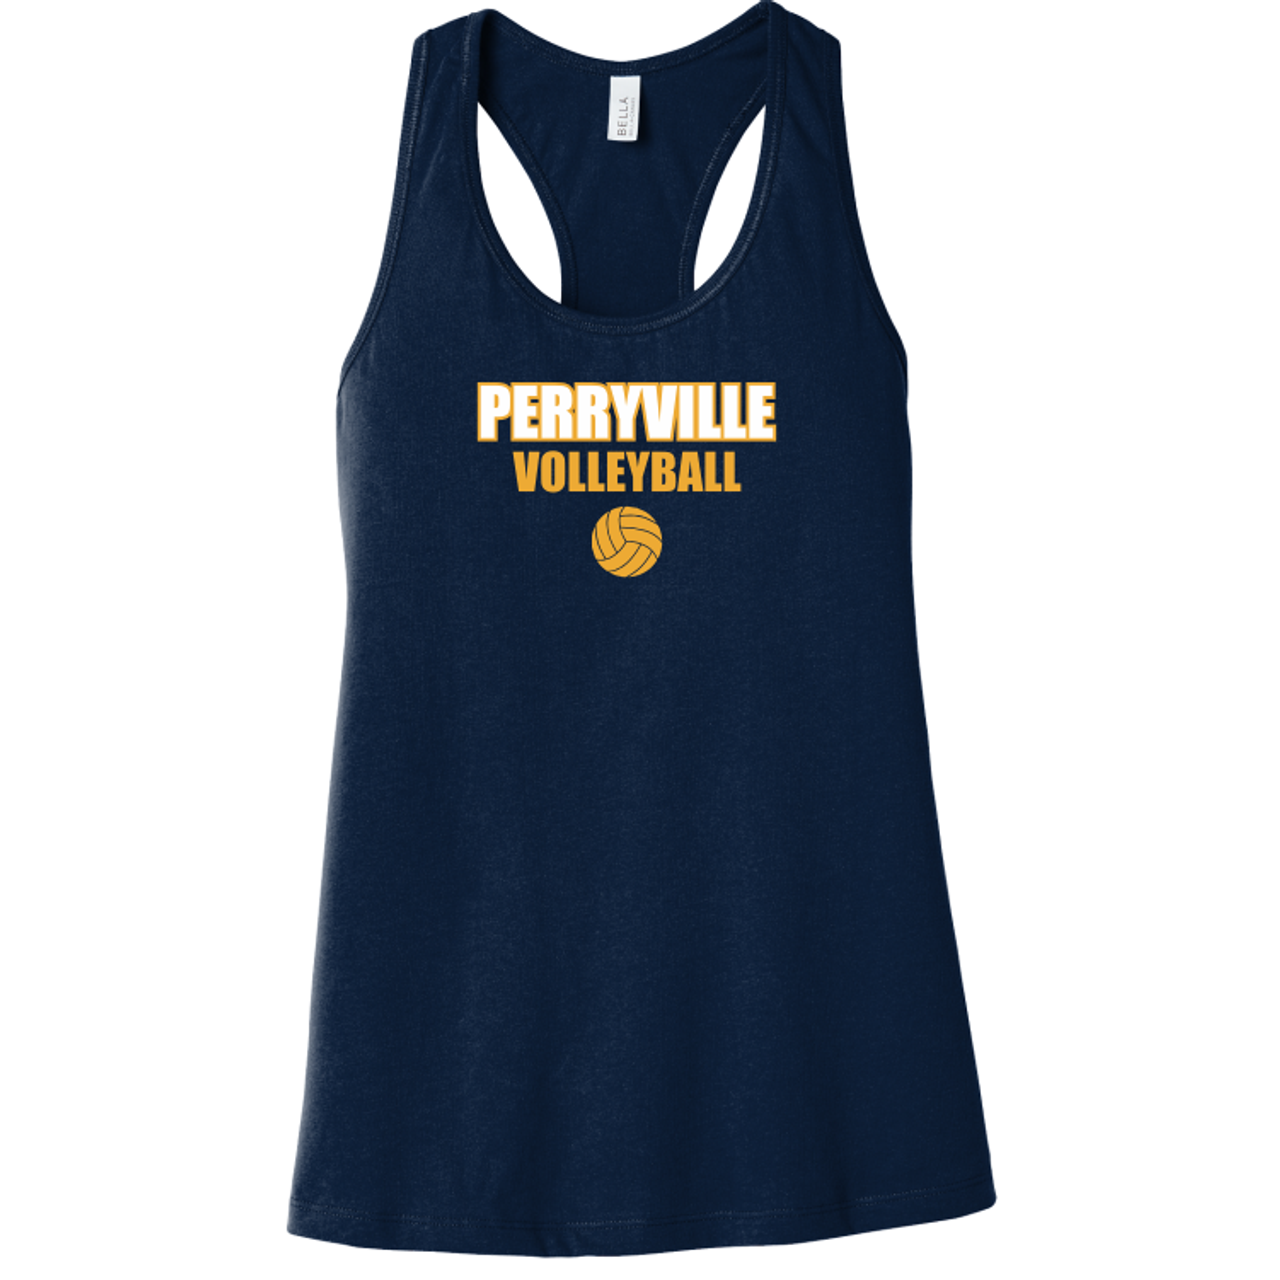 Perryville Volleyball Tank Top, Navy